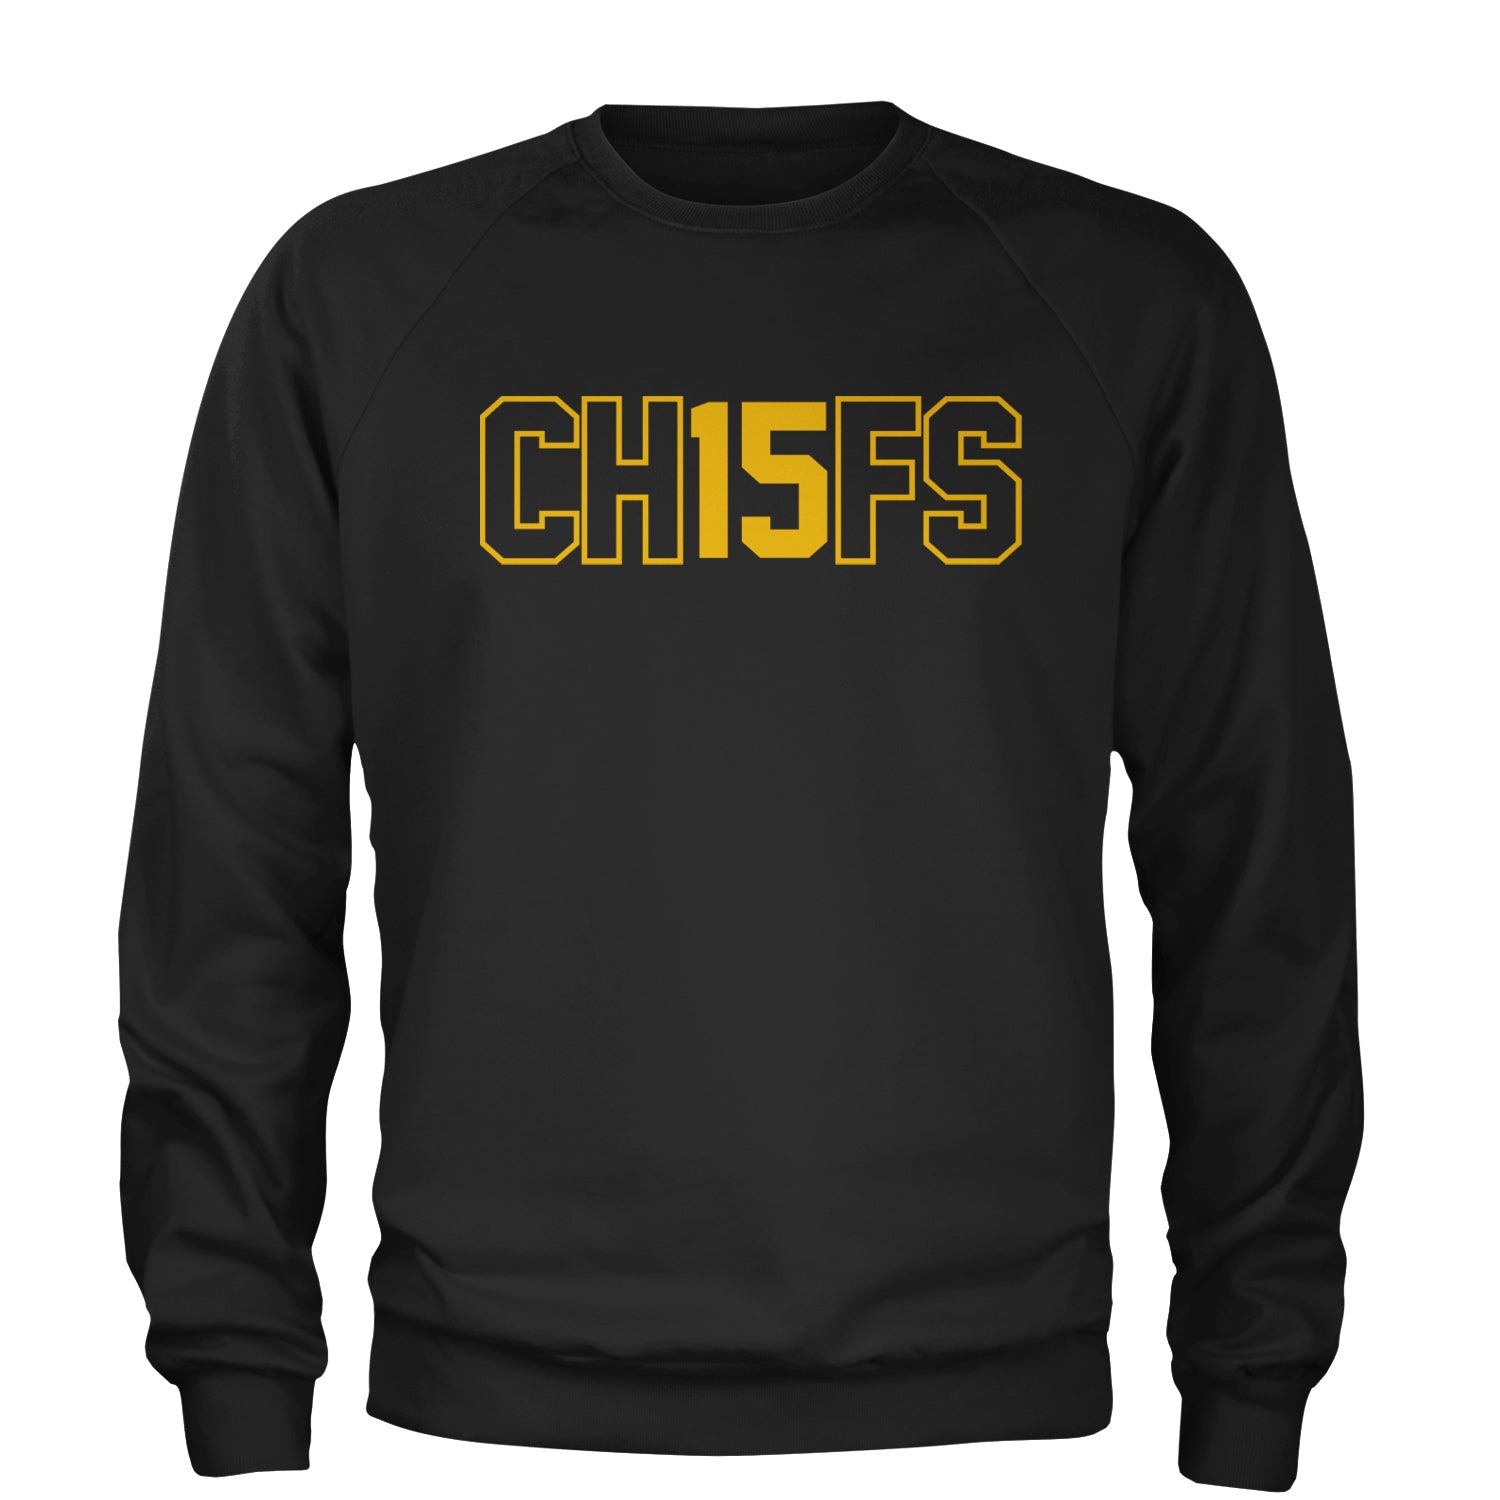 Ch15fs Chief 15 Shirt Adult Crewneck Sweatshirt ass, big, burrowhead, game, kelce, know, moutha, my, nd, patrick, role, shut, sports, your by Expression Tees